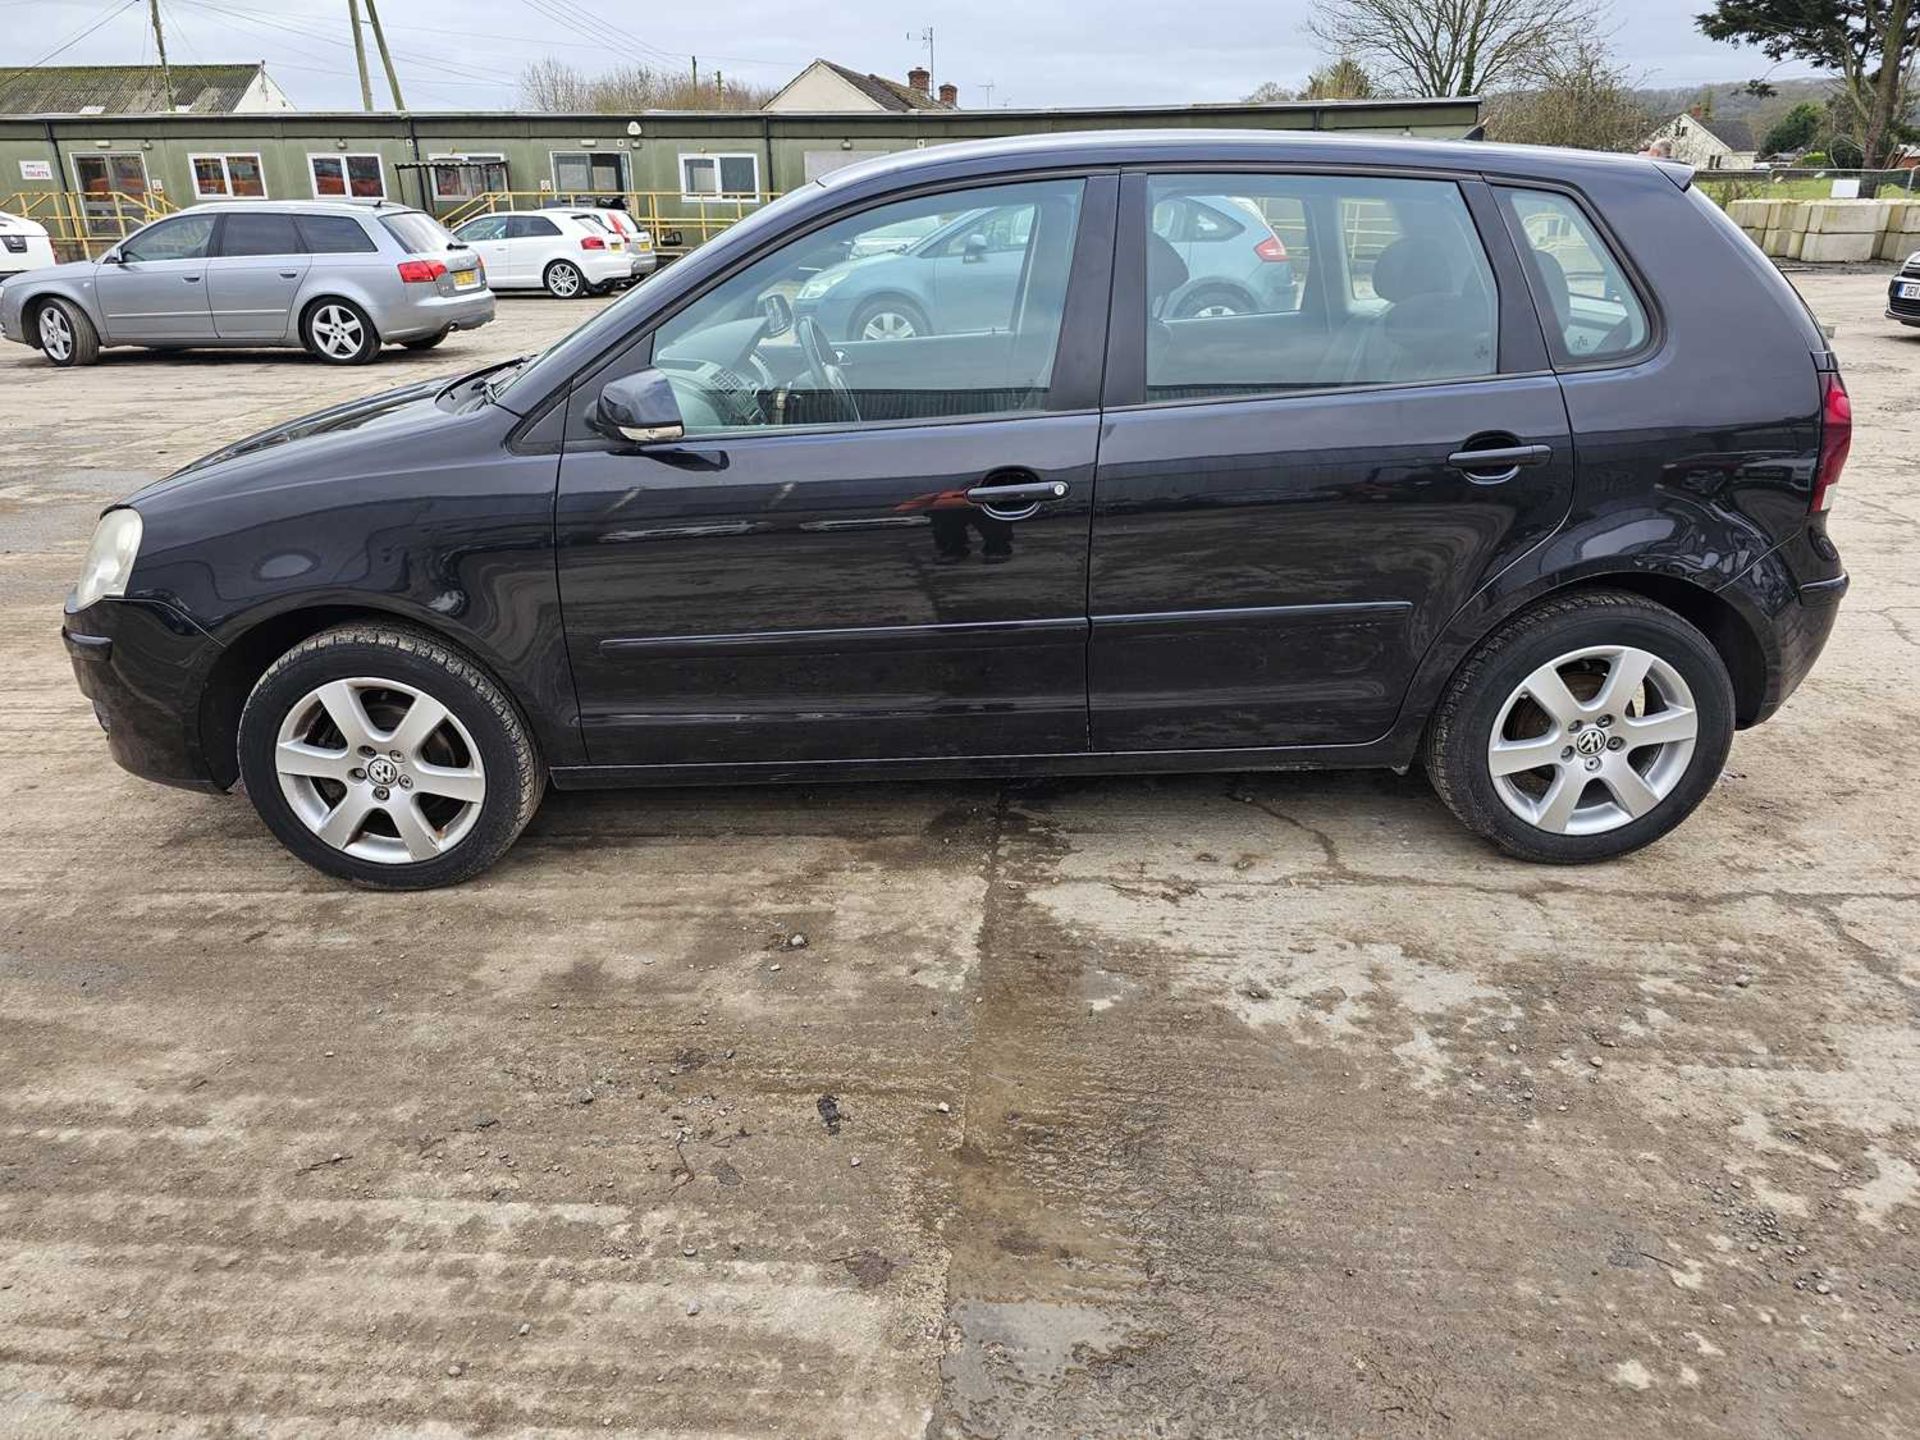 2008 Volkswagen Polo, 5 Speed, A/C (Reg. Docs. Available, Tested 05/24) - Image 2 of 28